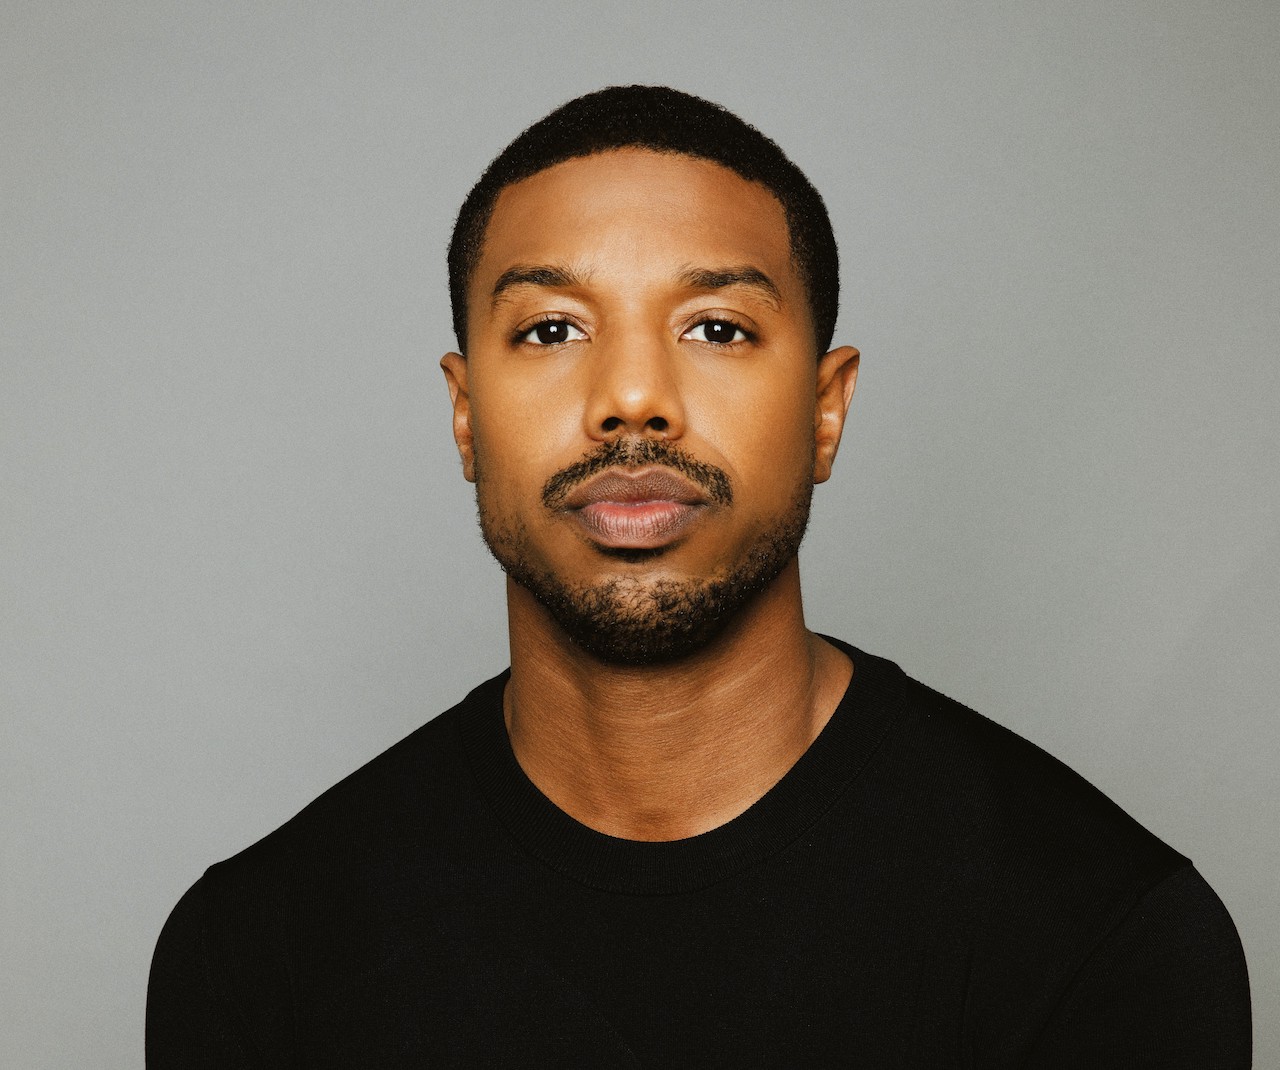 michael b. jordan, the academy of motion pictures